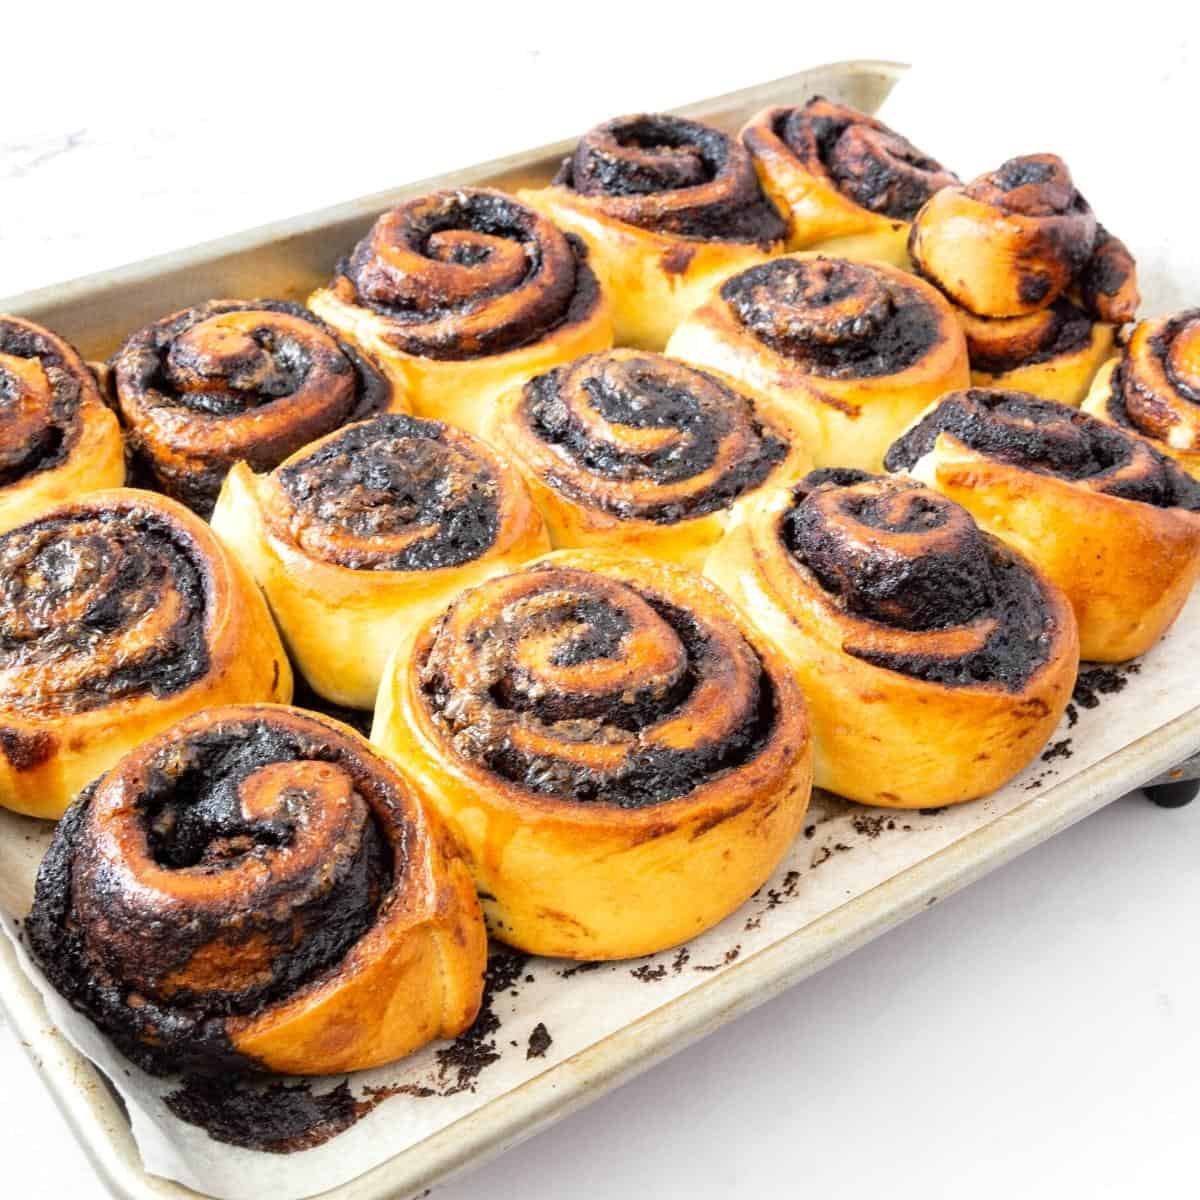 A baking tray with chocolate cinnamon rolls.